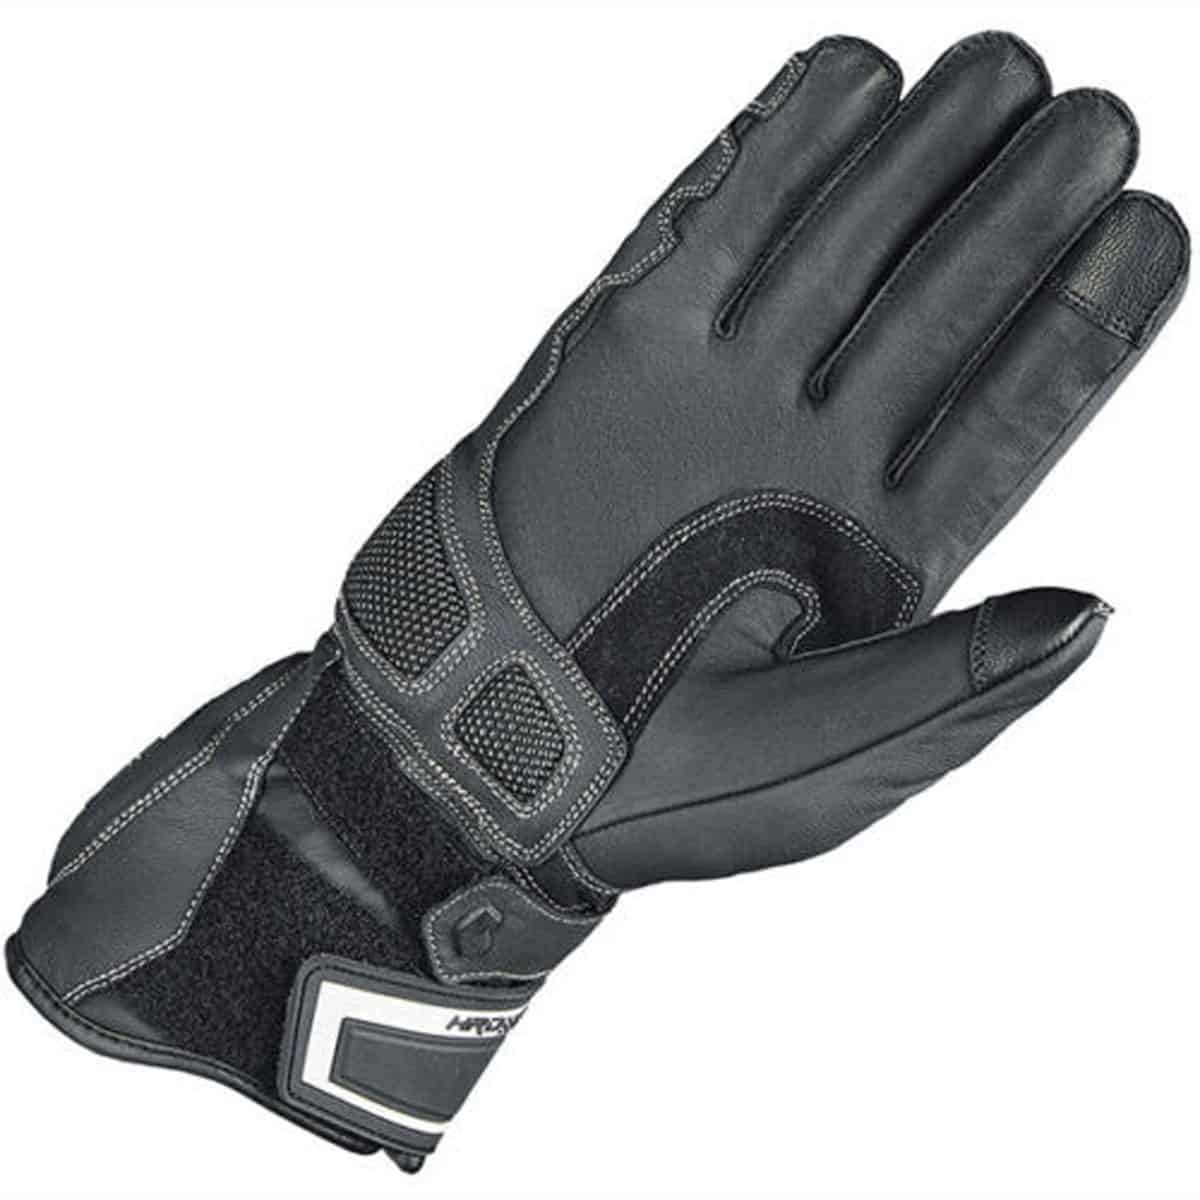 Held Revel 3 gloves: High-spec unlined sports gloves for road riding & light track use - Palm view